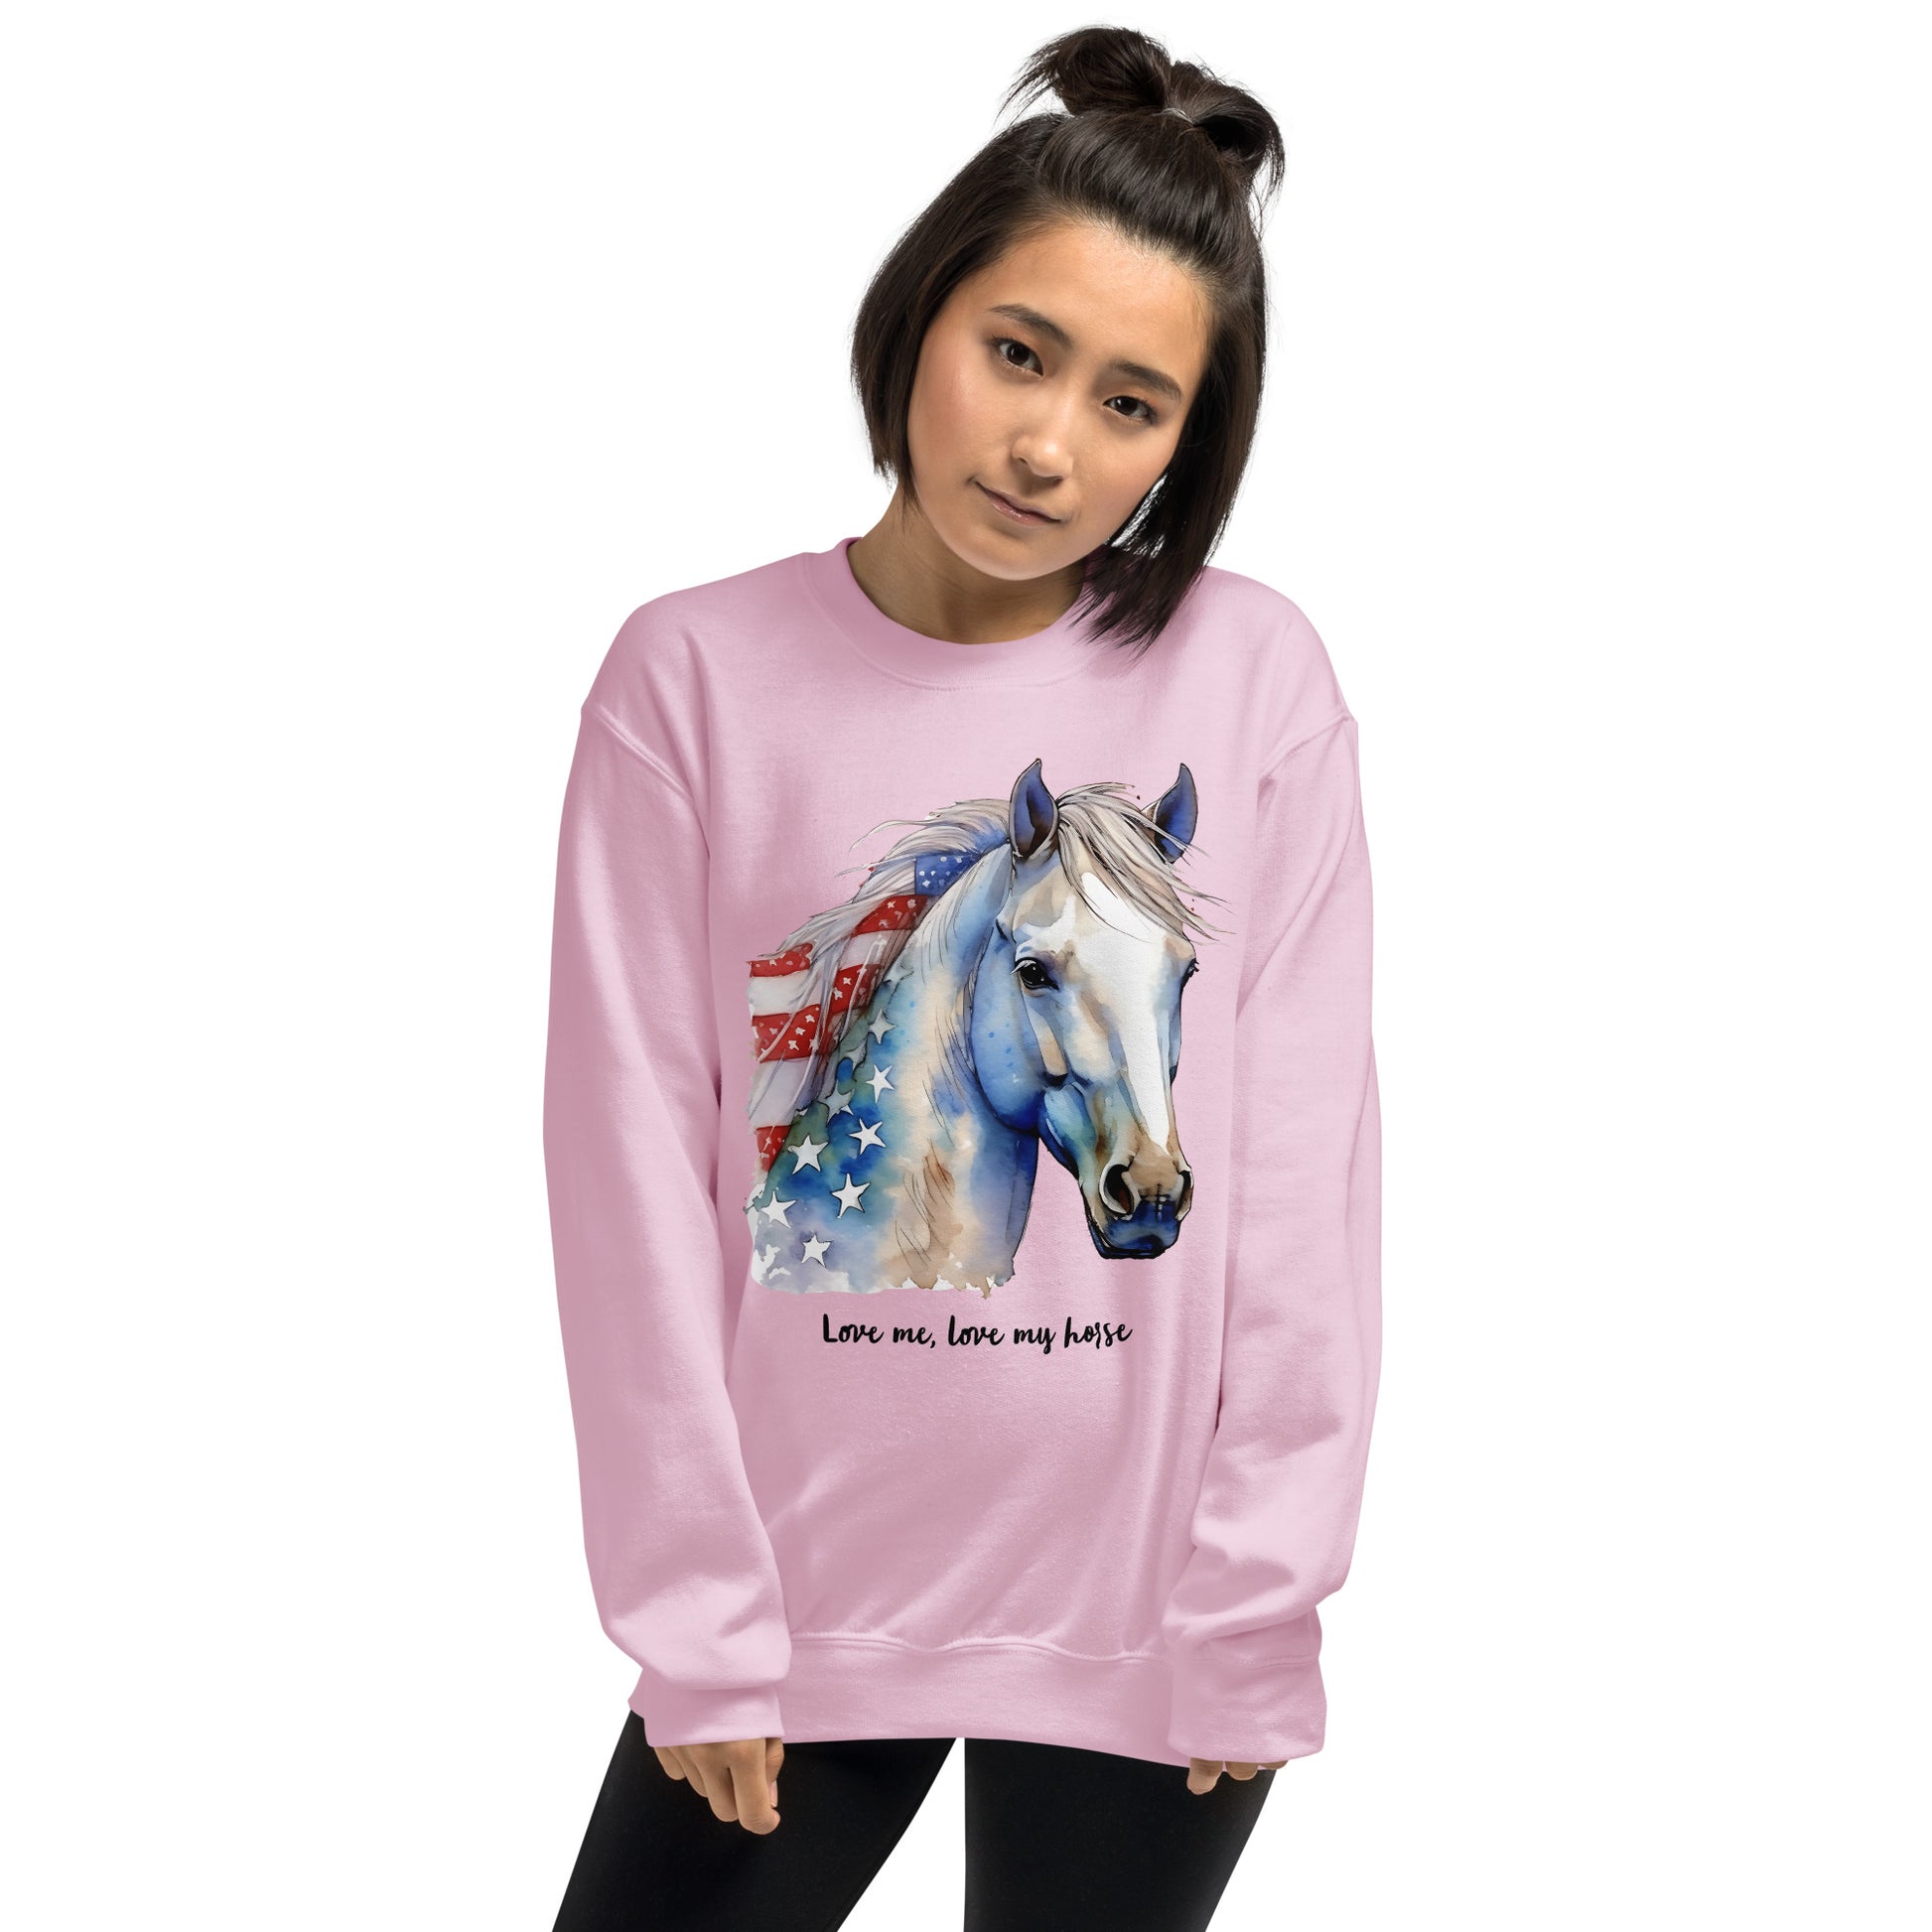 Pink USA Colored Patriotic Sweatshirt With Blue Horse Graphic Design For Horse Lovers